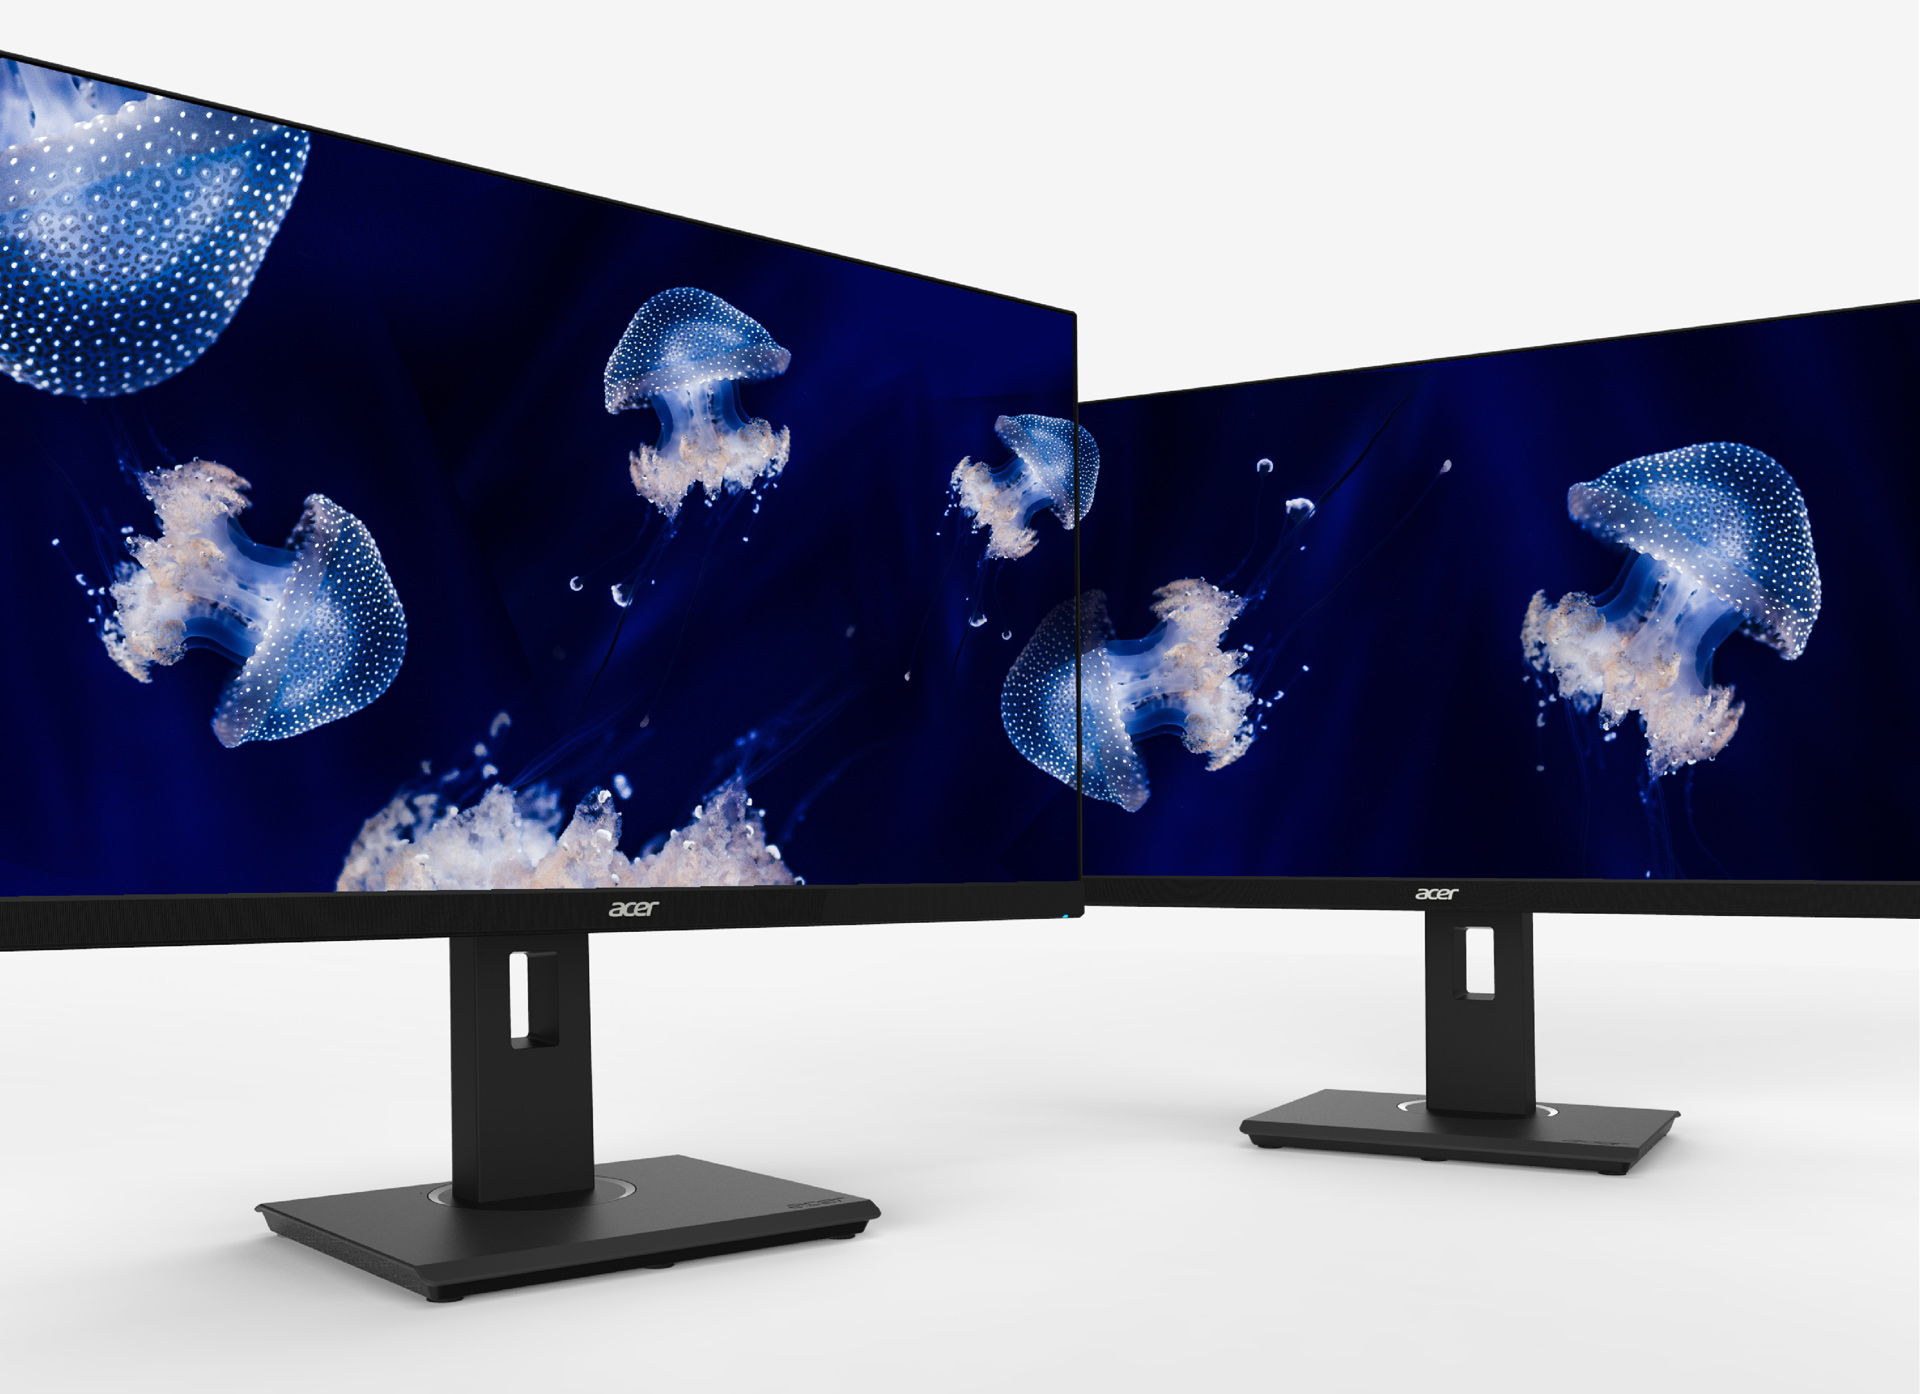 a jellyfish image cross two monitors as screen